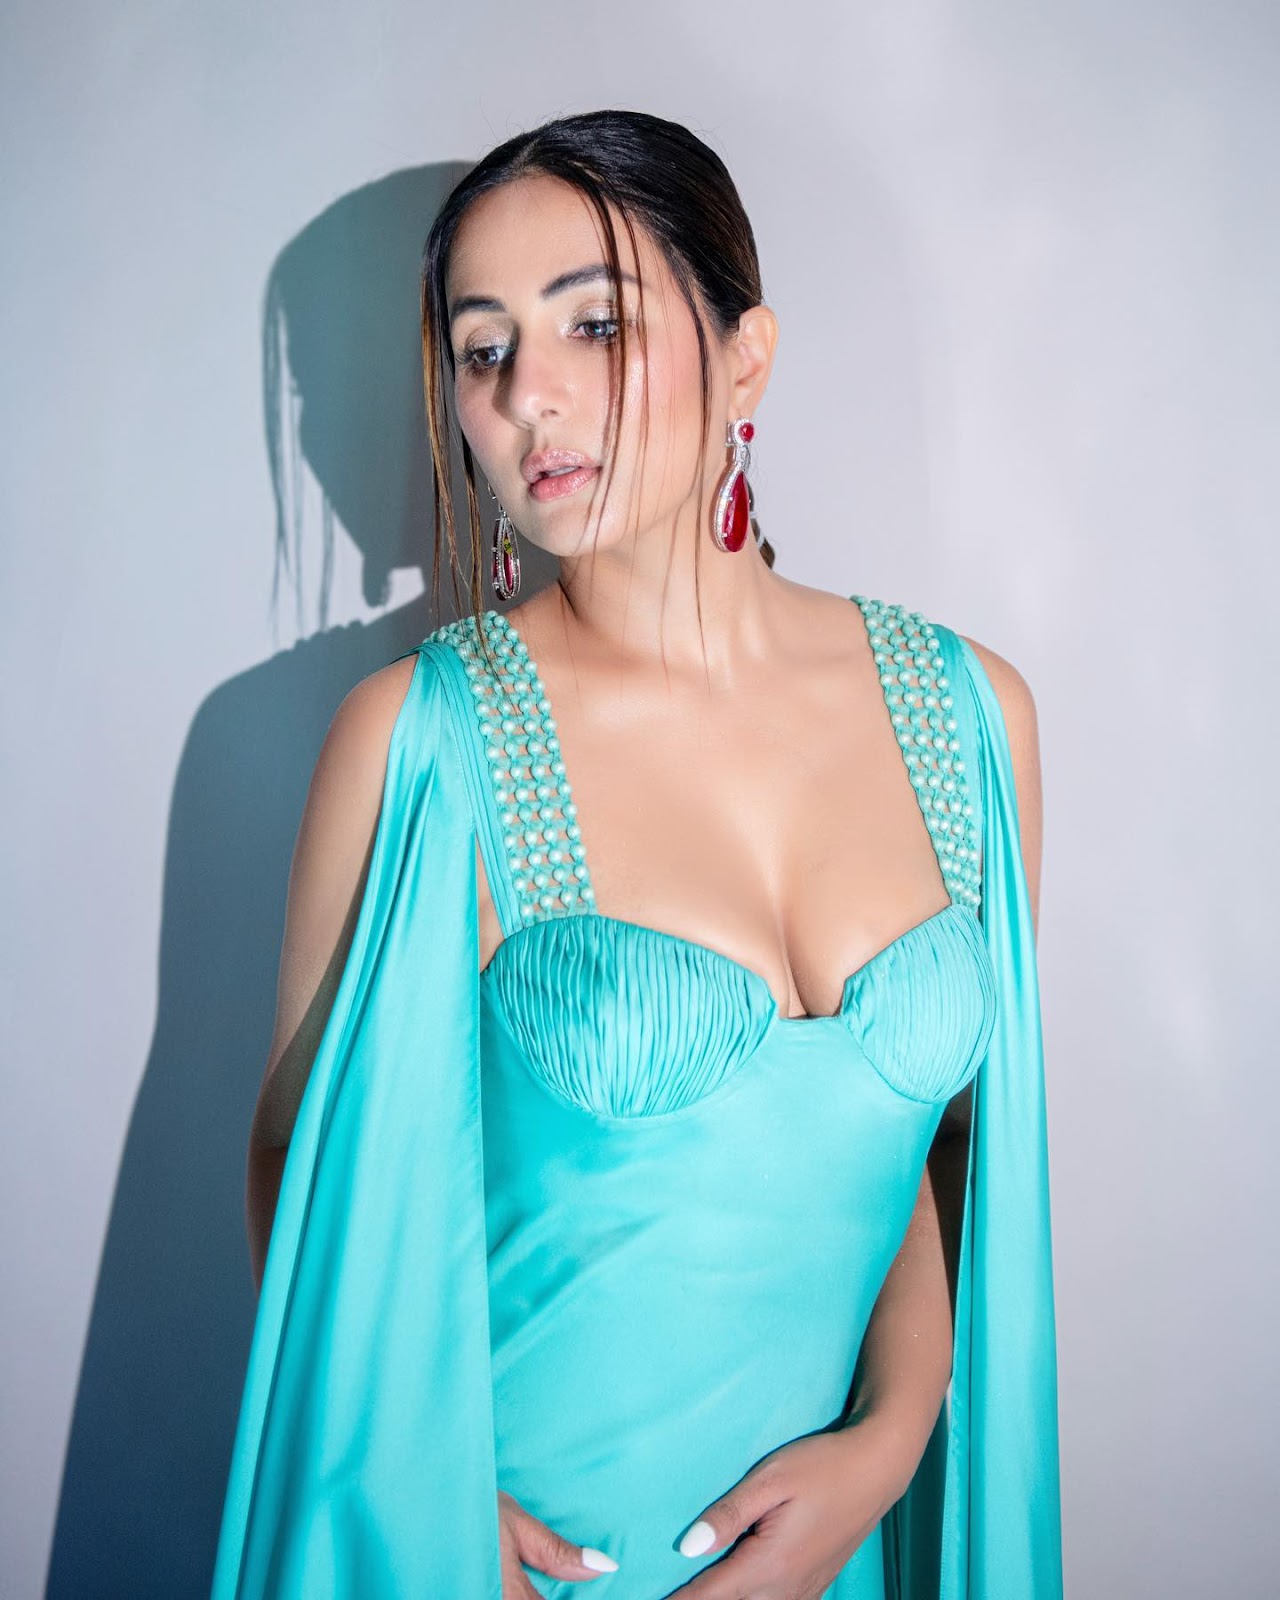 Hina Khan cleavage turquoise outfit hot tv actress